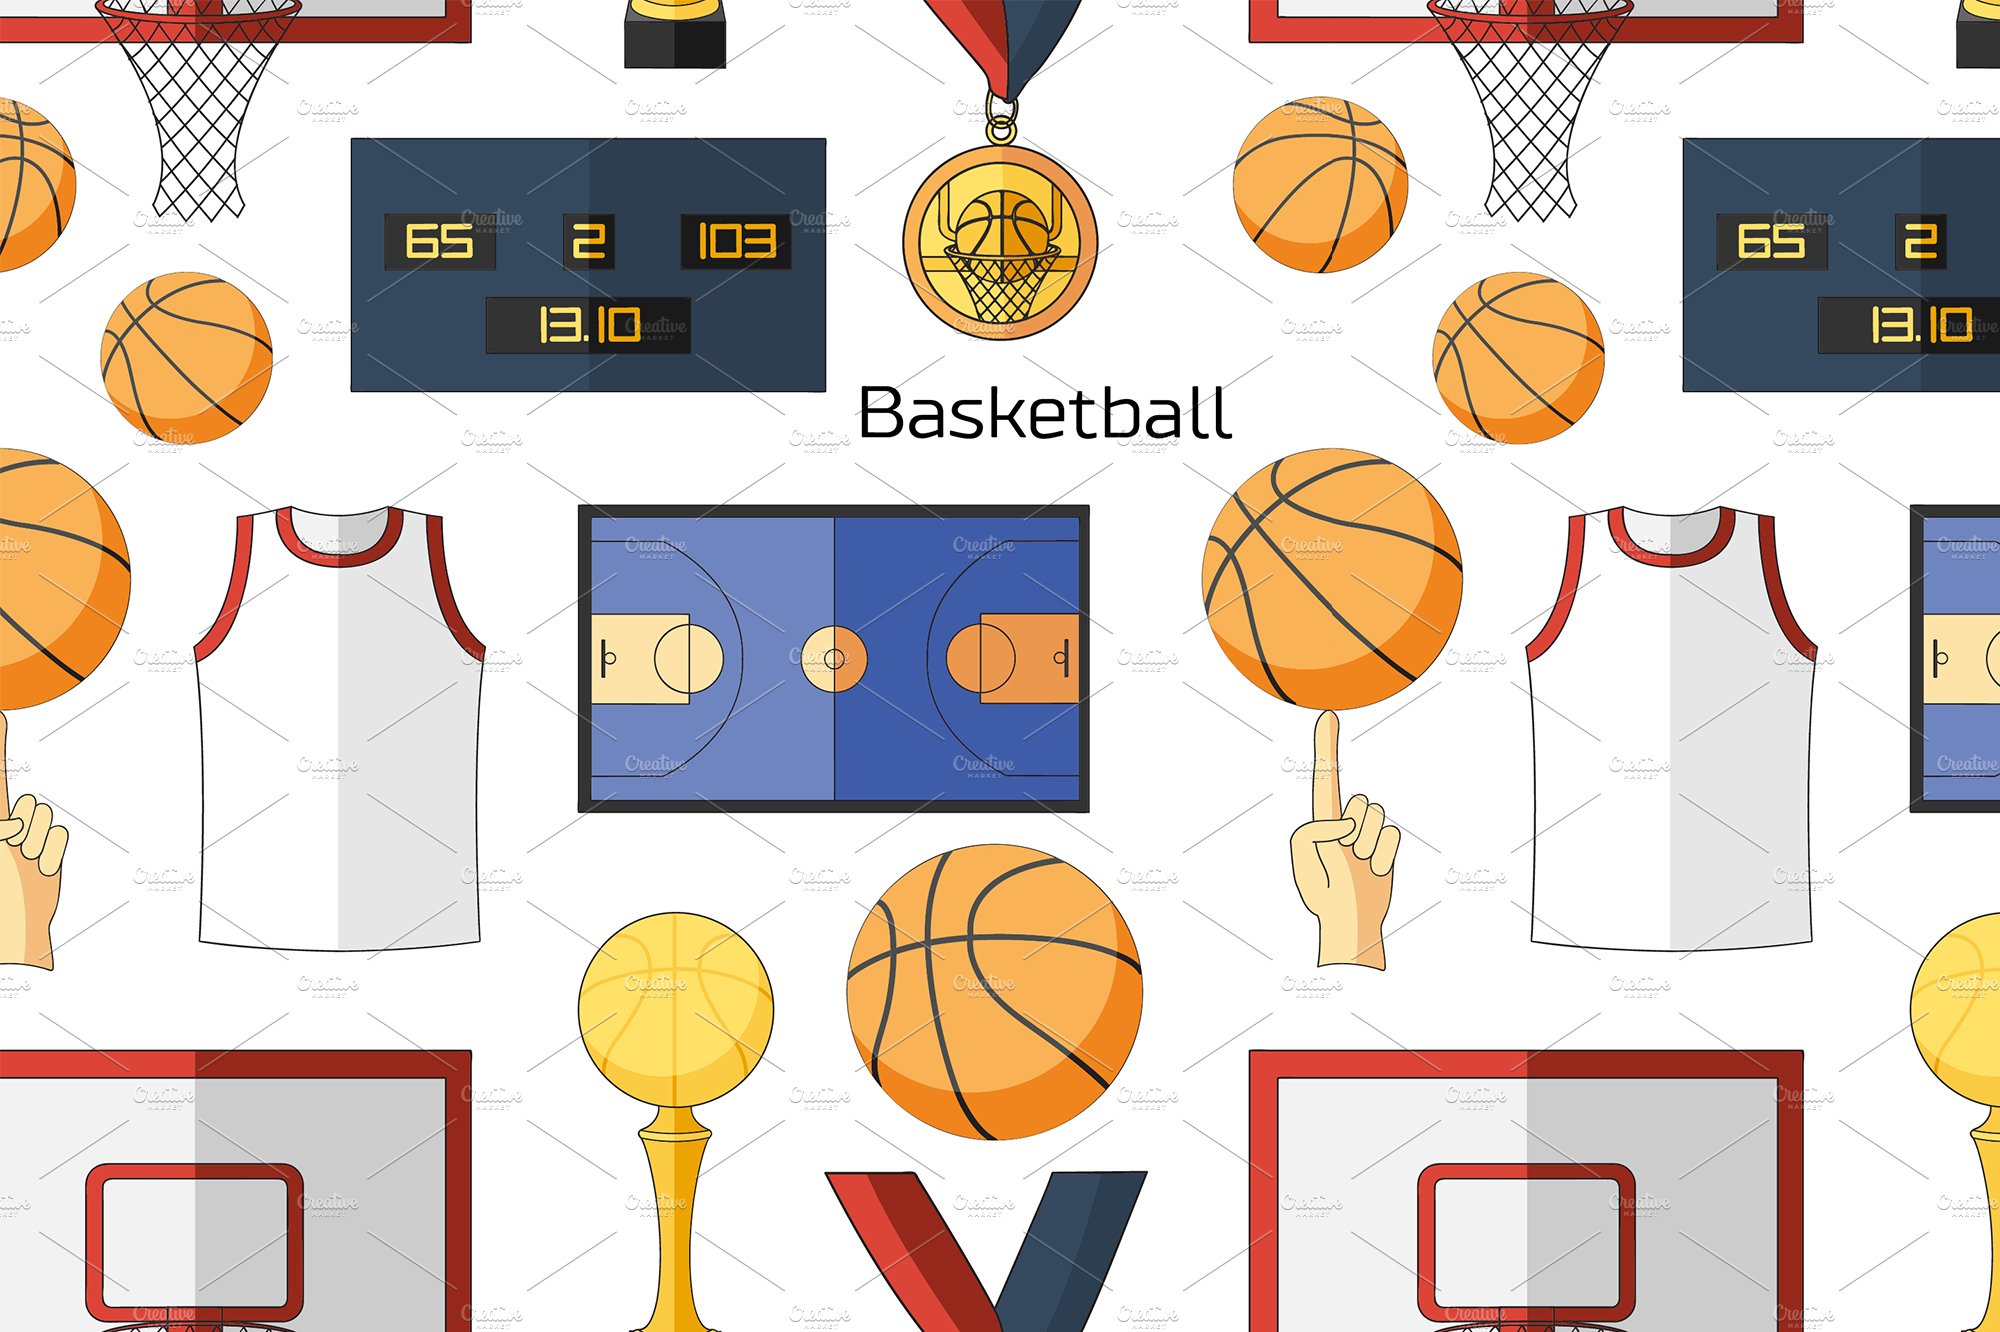 Basketball icons pattern cover image.